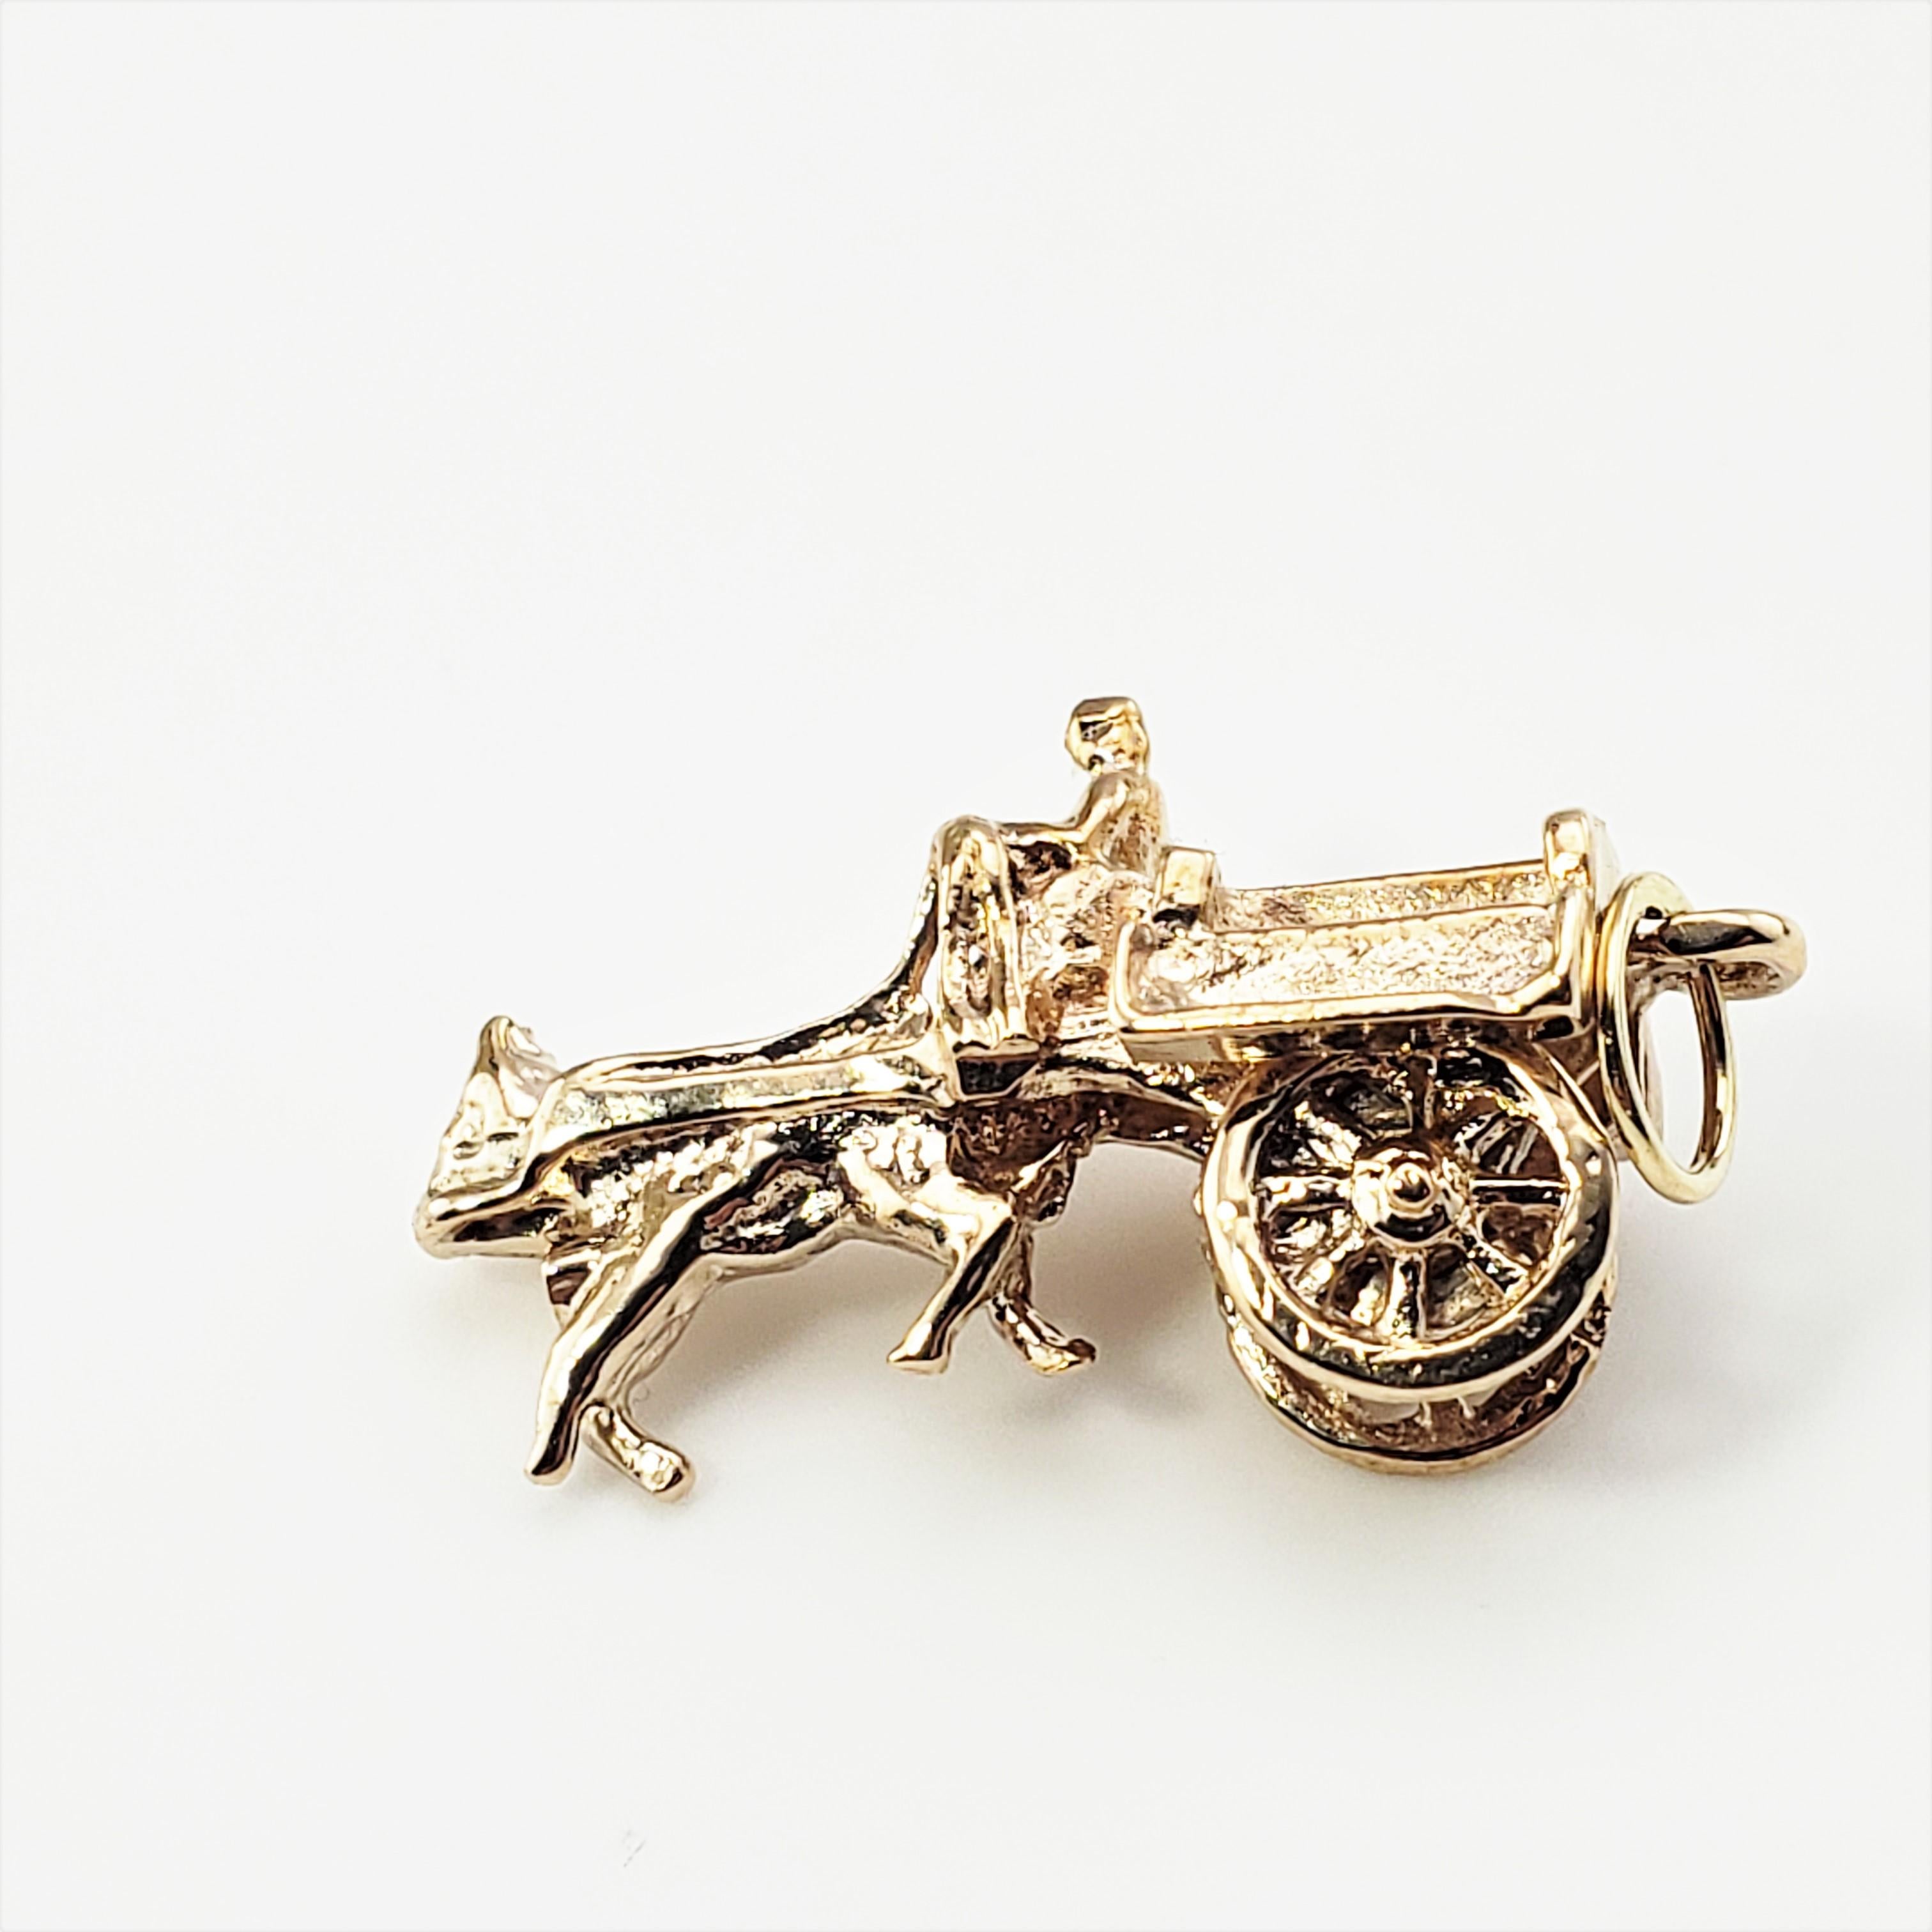 9 Karat Rose Gold Donkey and Cart Charm-

This 3D charm features a miniature horse and cart with wheels that spin meticulously detailed in 9K rose gold.

Size: 23 mm x 12 mm (actual charm)

Weight: 2.0 dwt. / 3.2 gr.

Stamped: 375

Very good